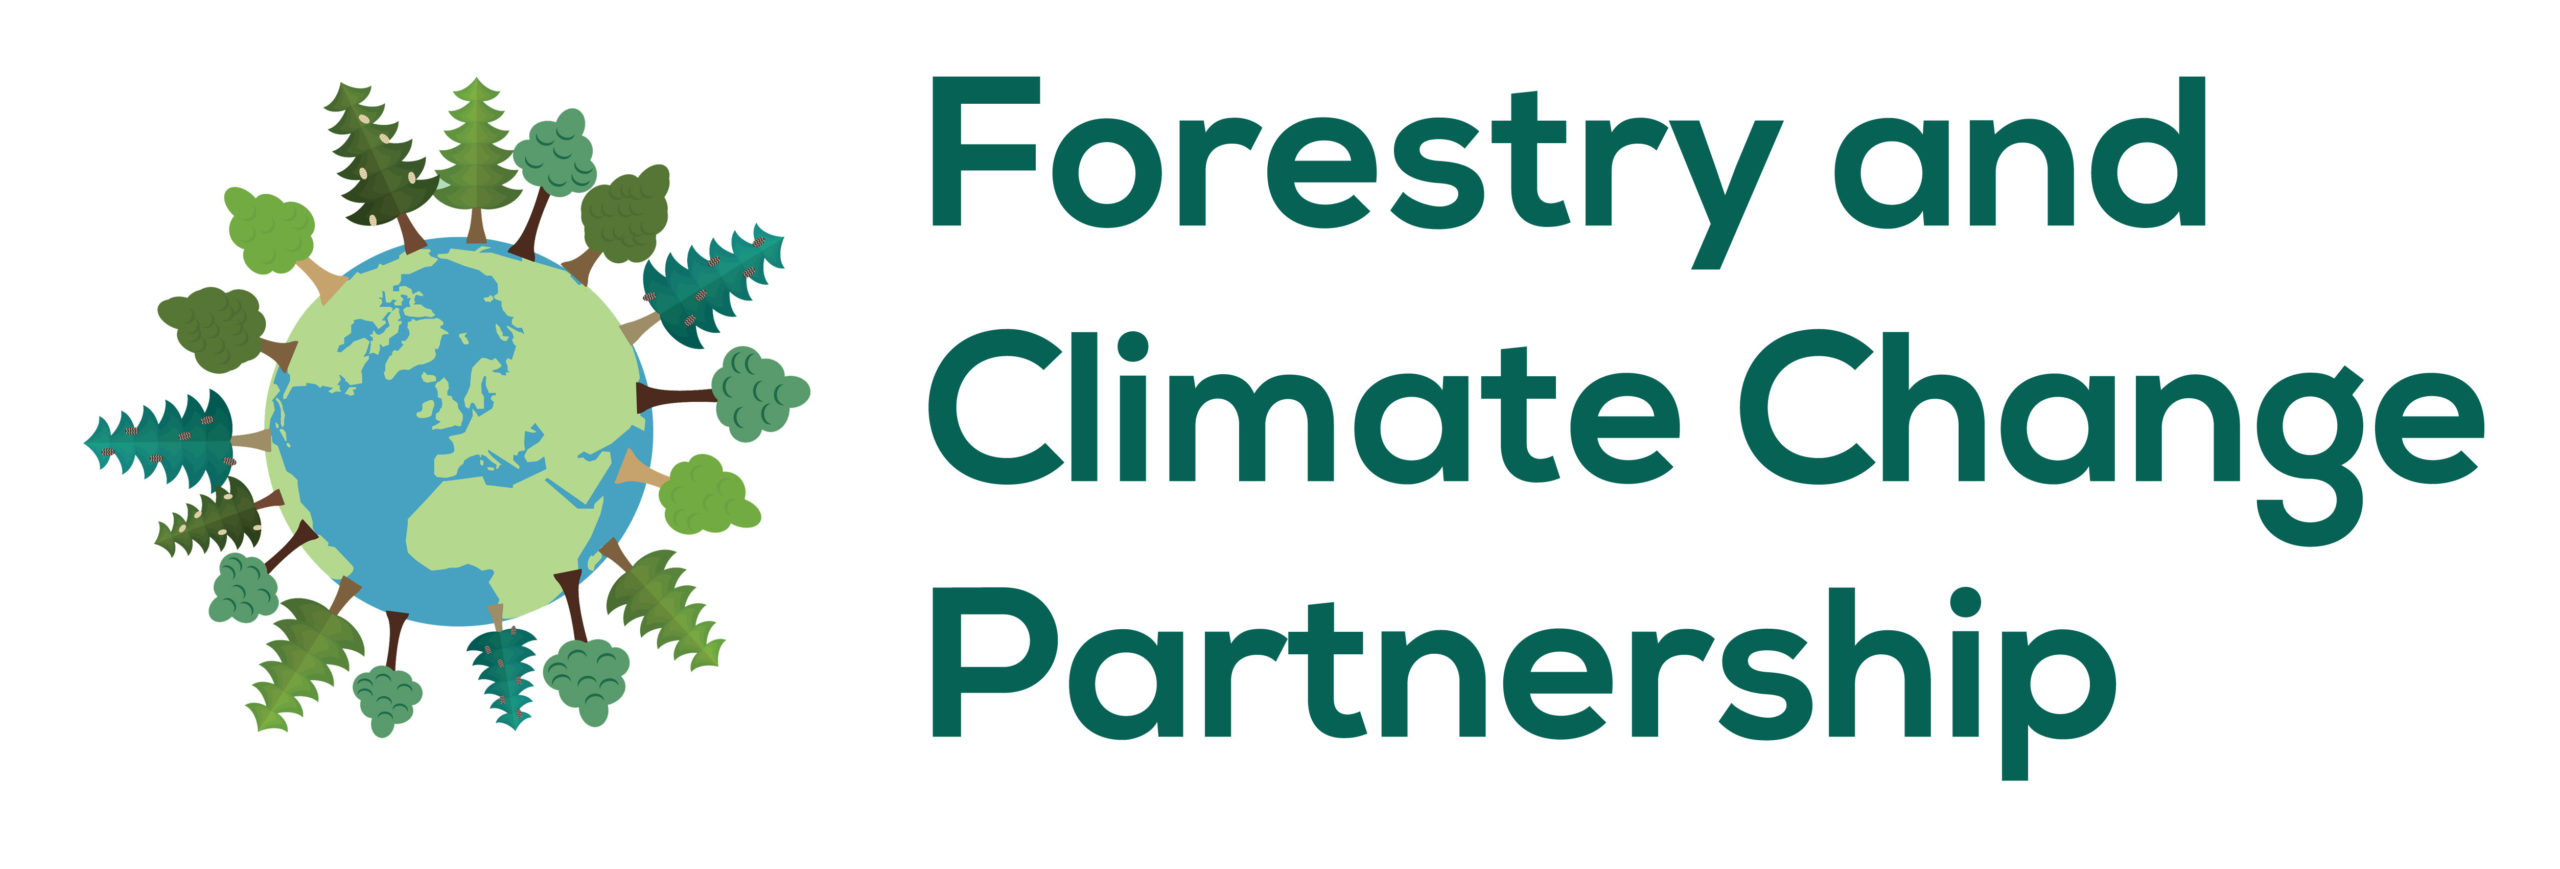 The Forestry and Climate Change Partnership